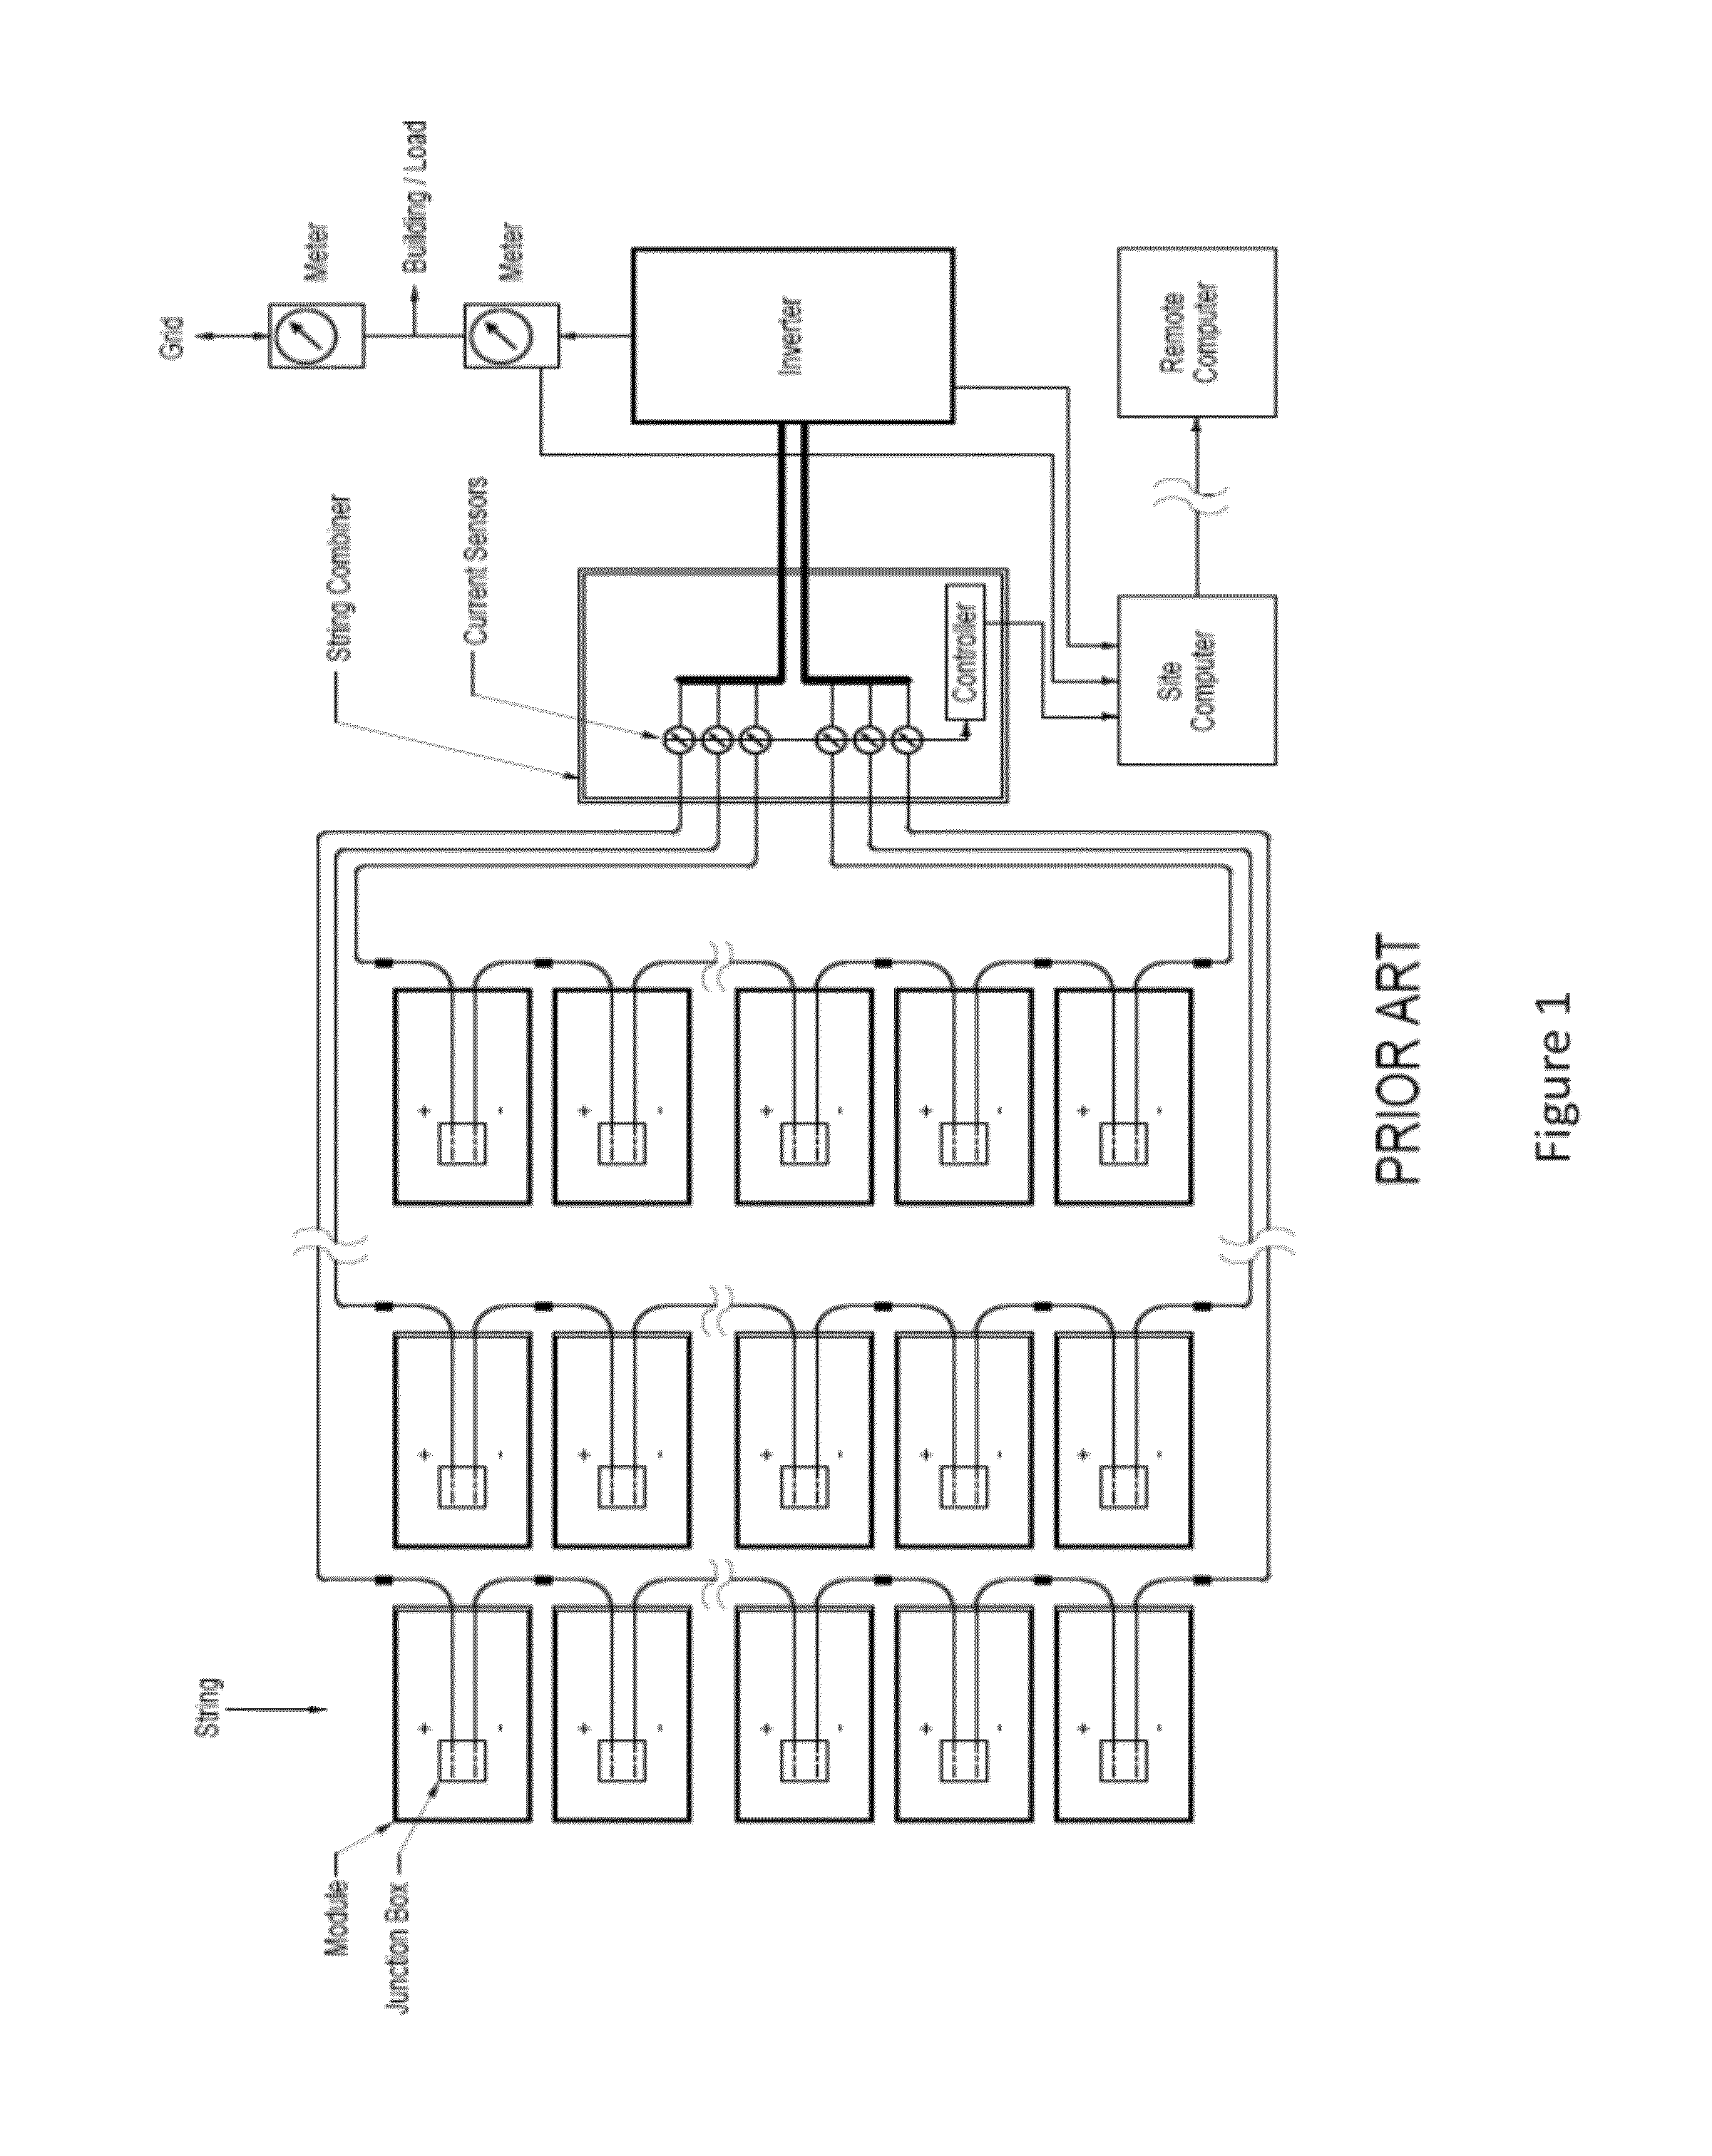 System and methods for high-precision string-level measurement of photovoltaic array performance